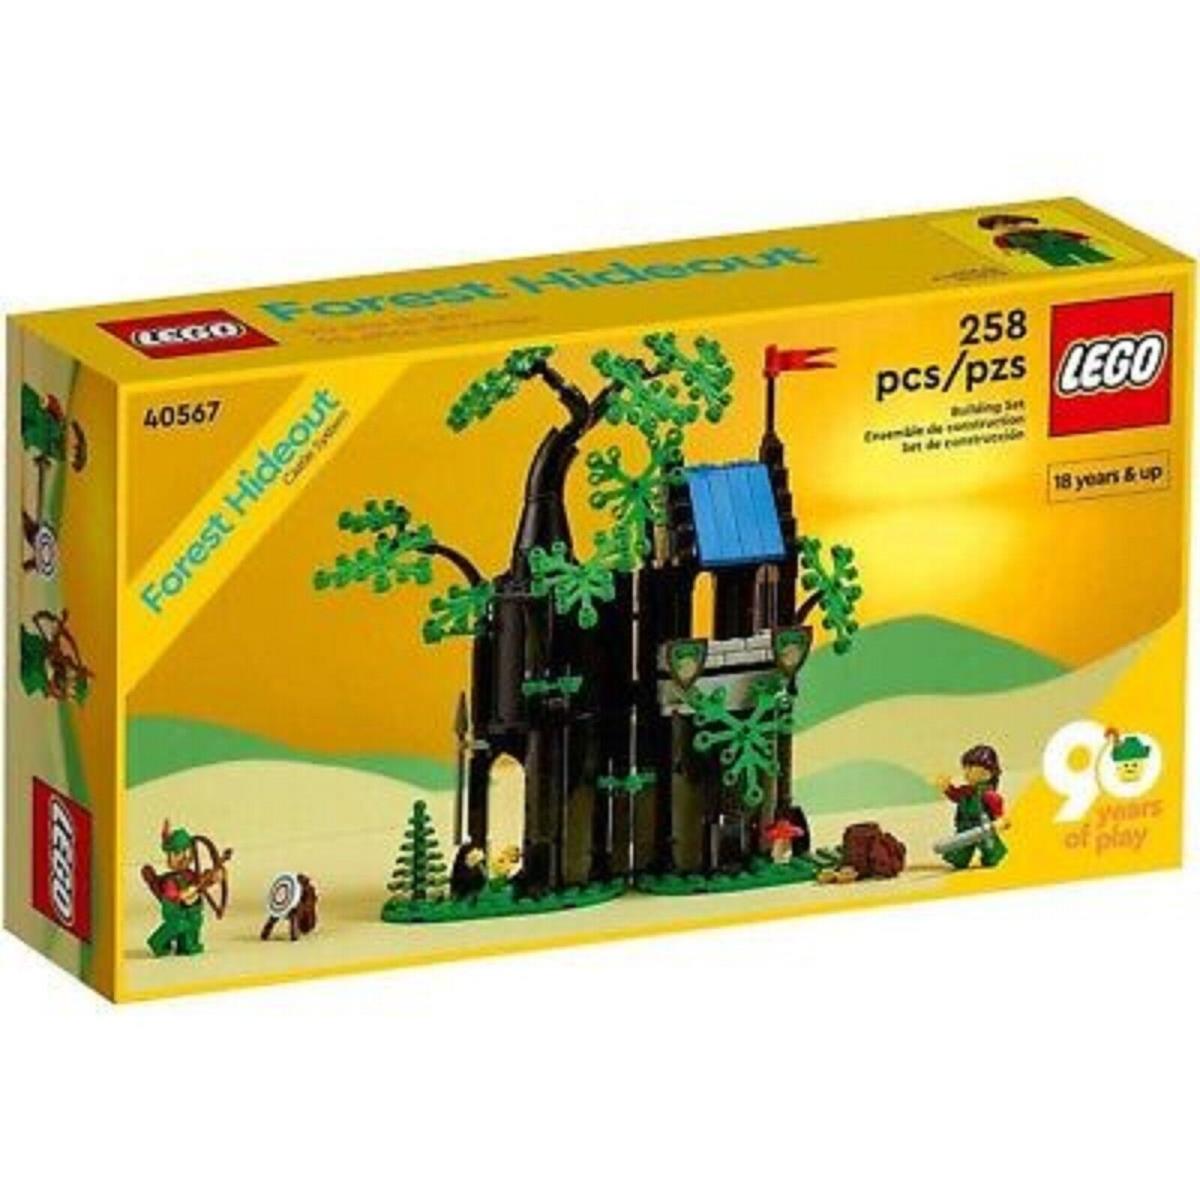 Lego Forest Hideout Castle System 40567 258 Pcs. 90 Years